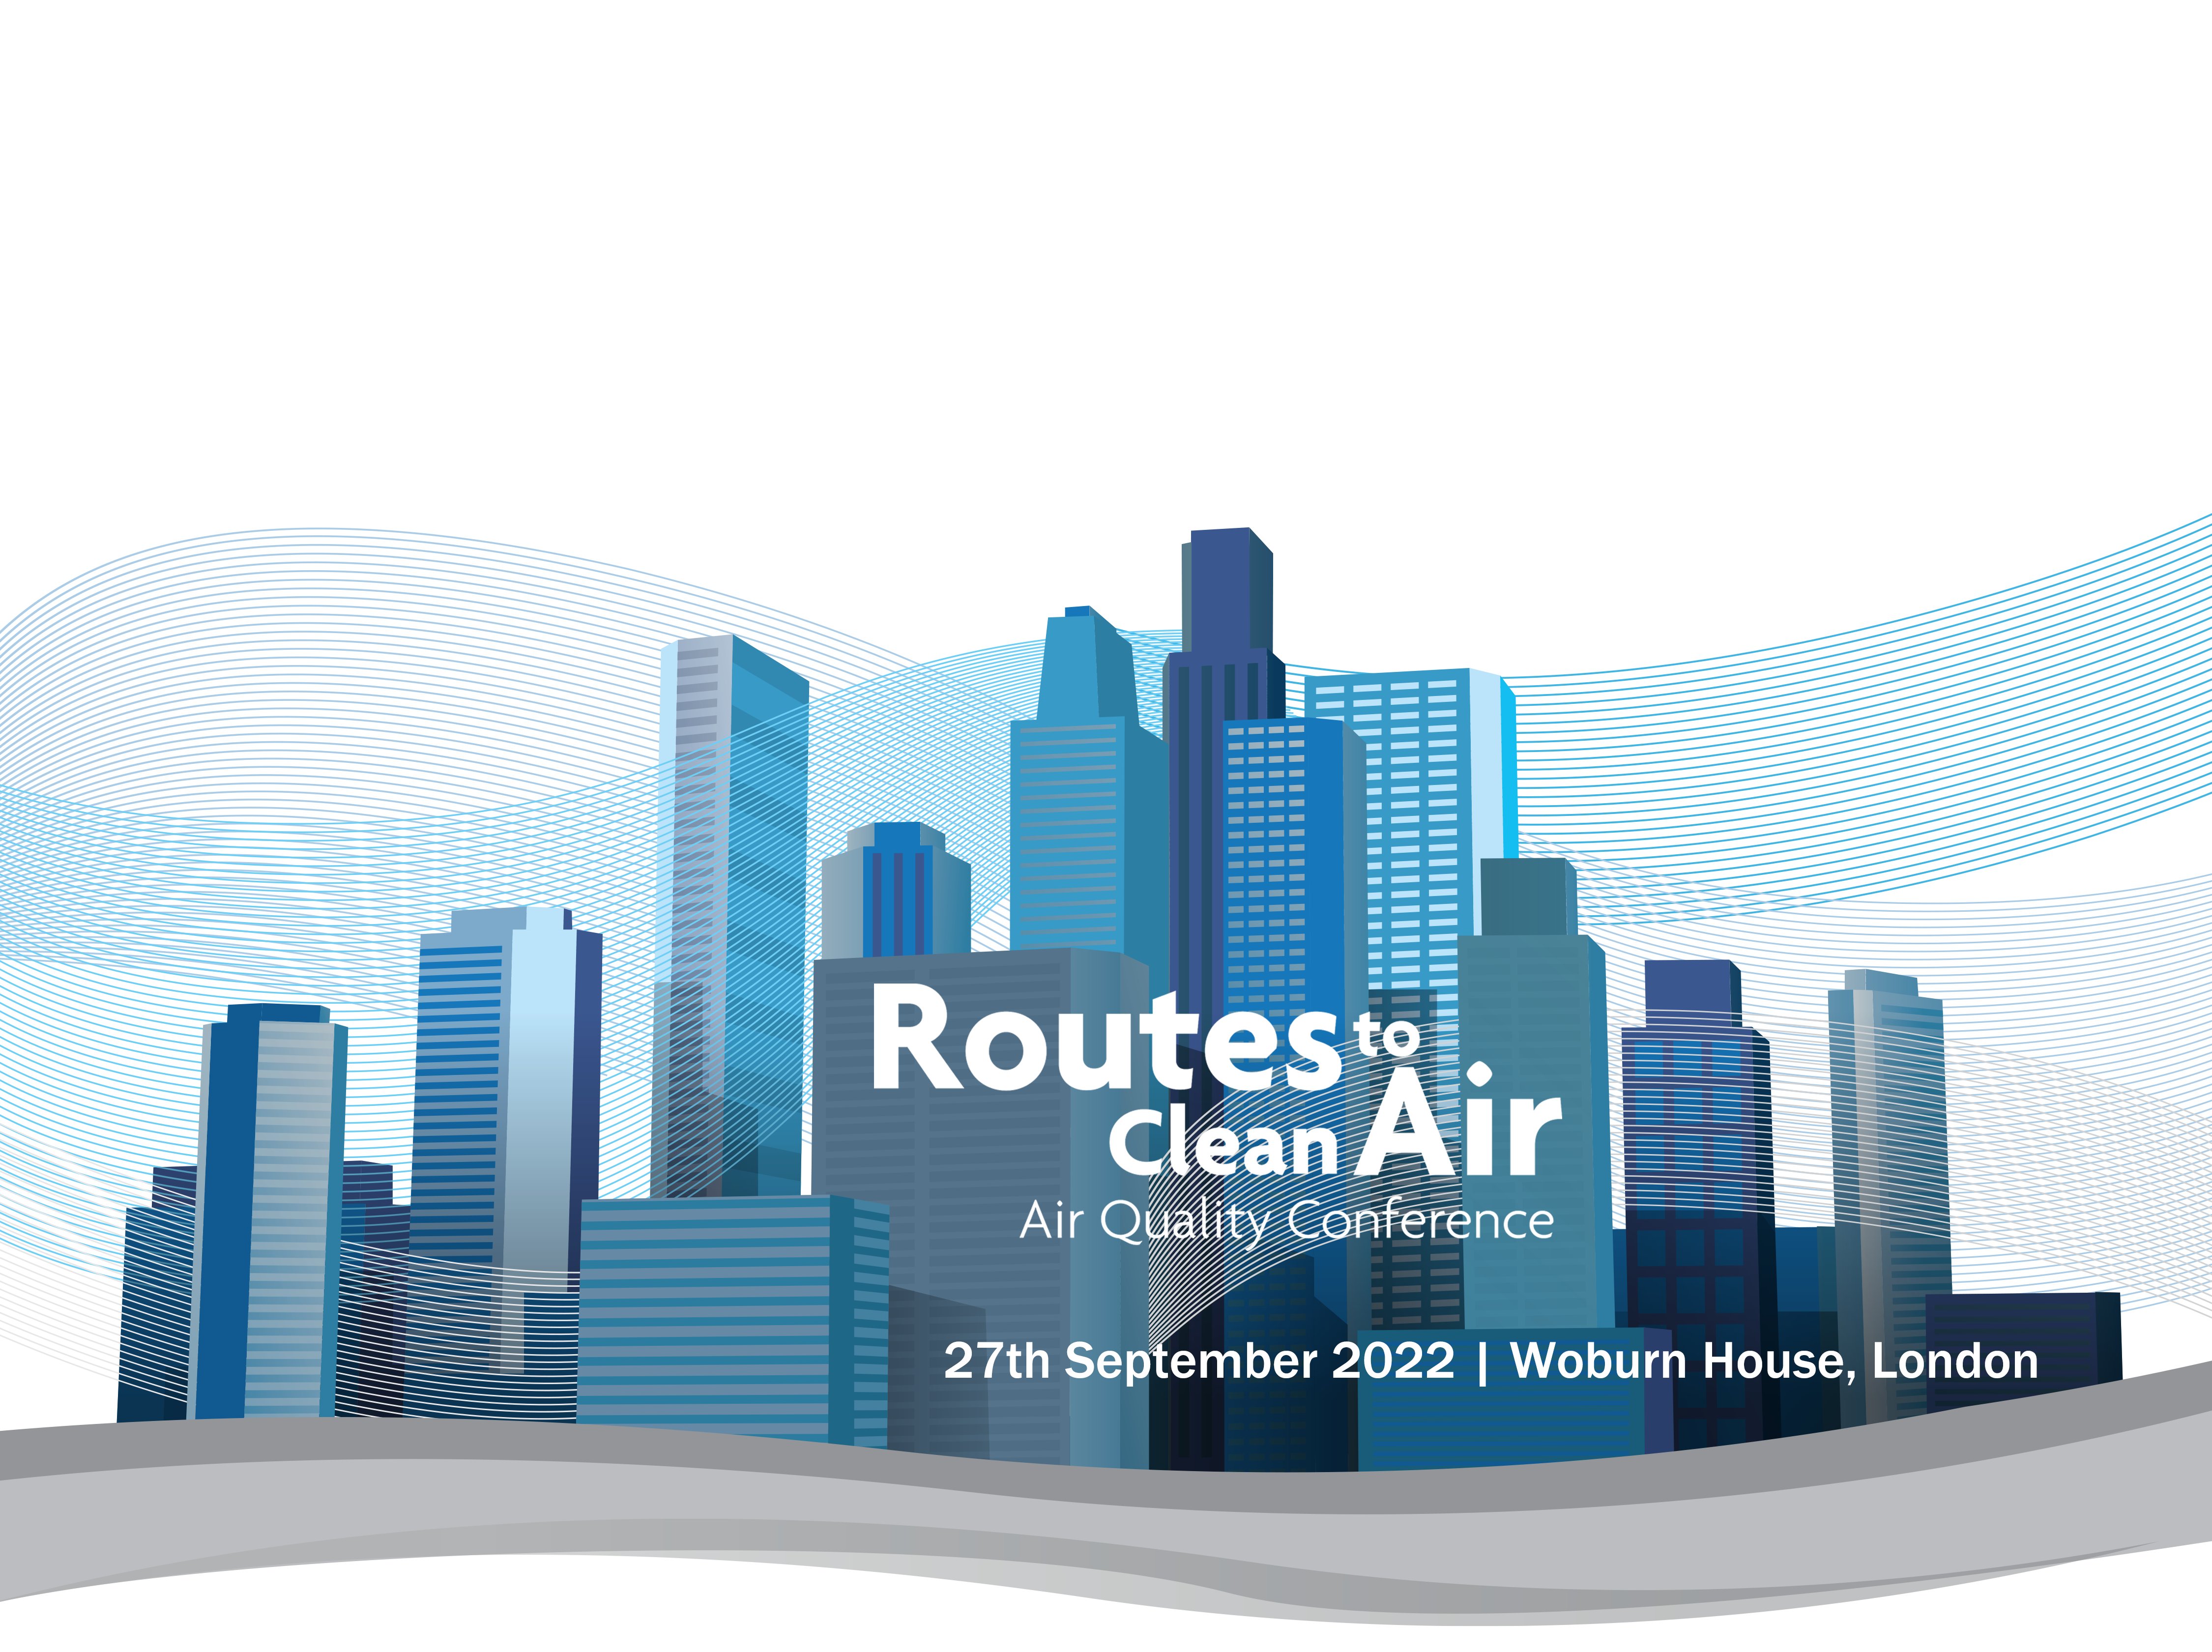 Graphic of a city with overlaid text "Routes to Clean Air Air Quality Conference | 27th September 2022 | Woburn House, London